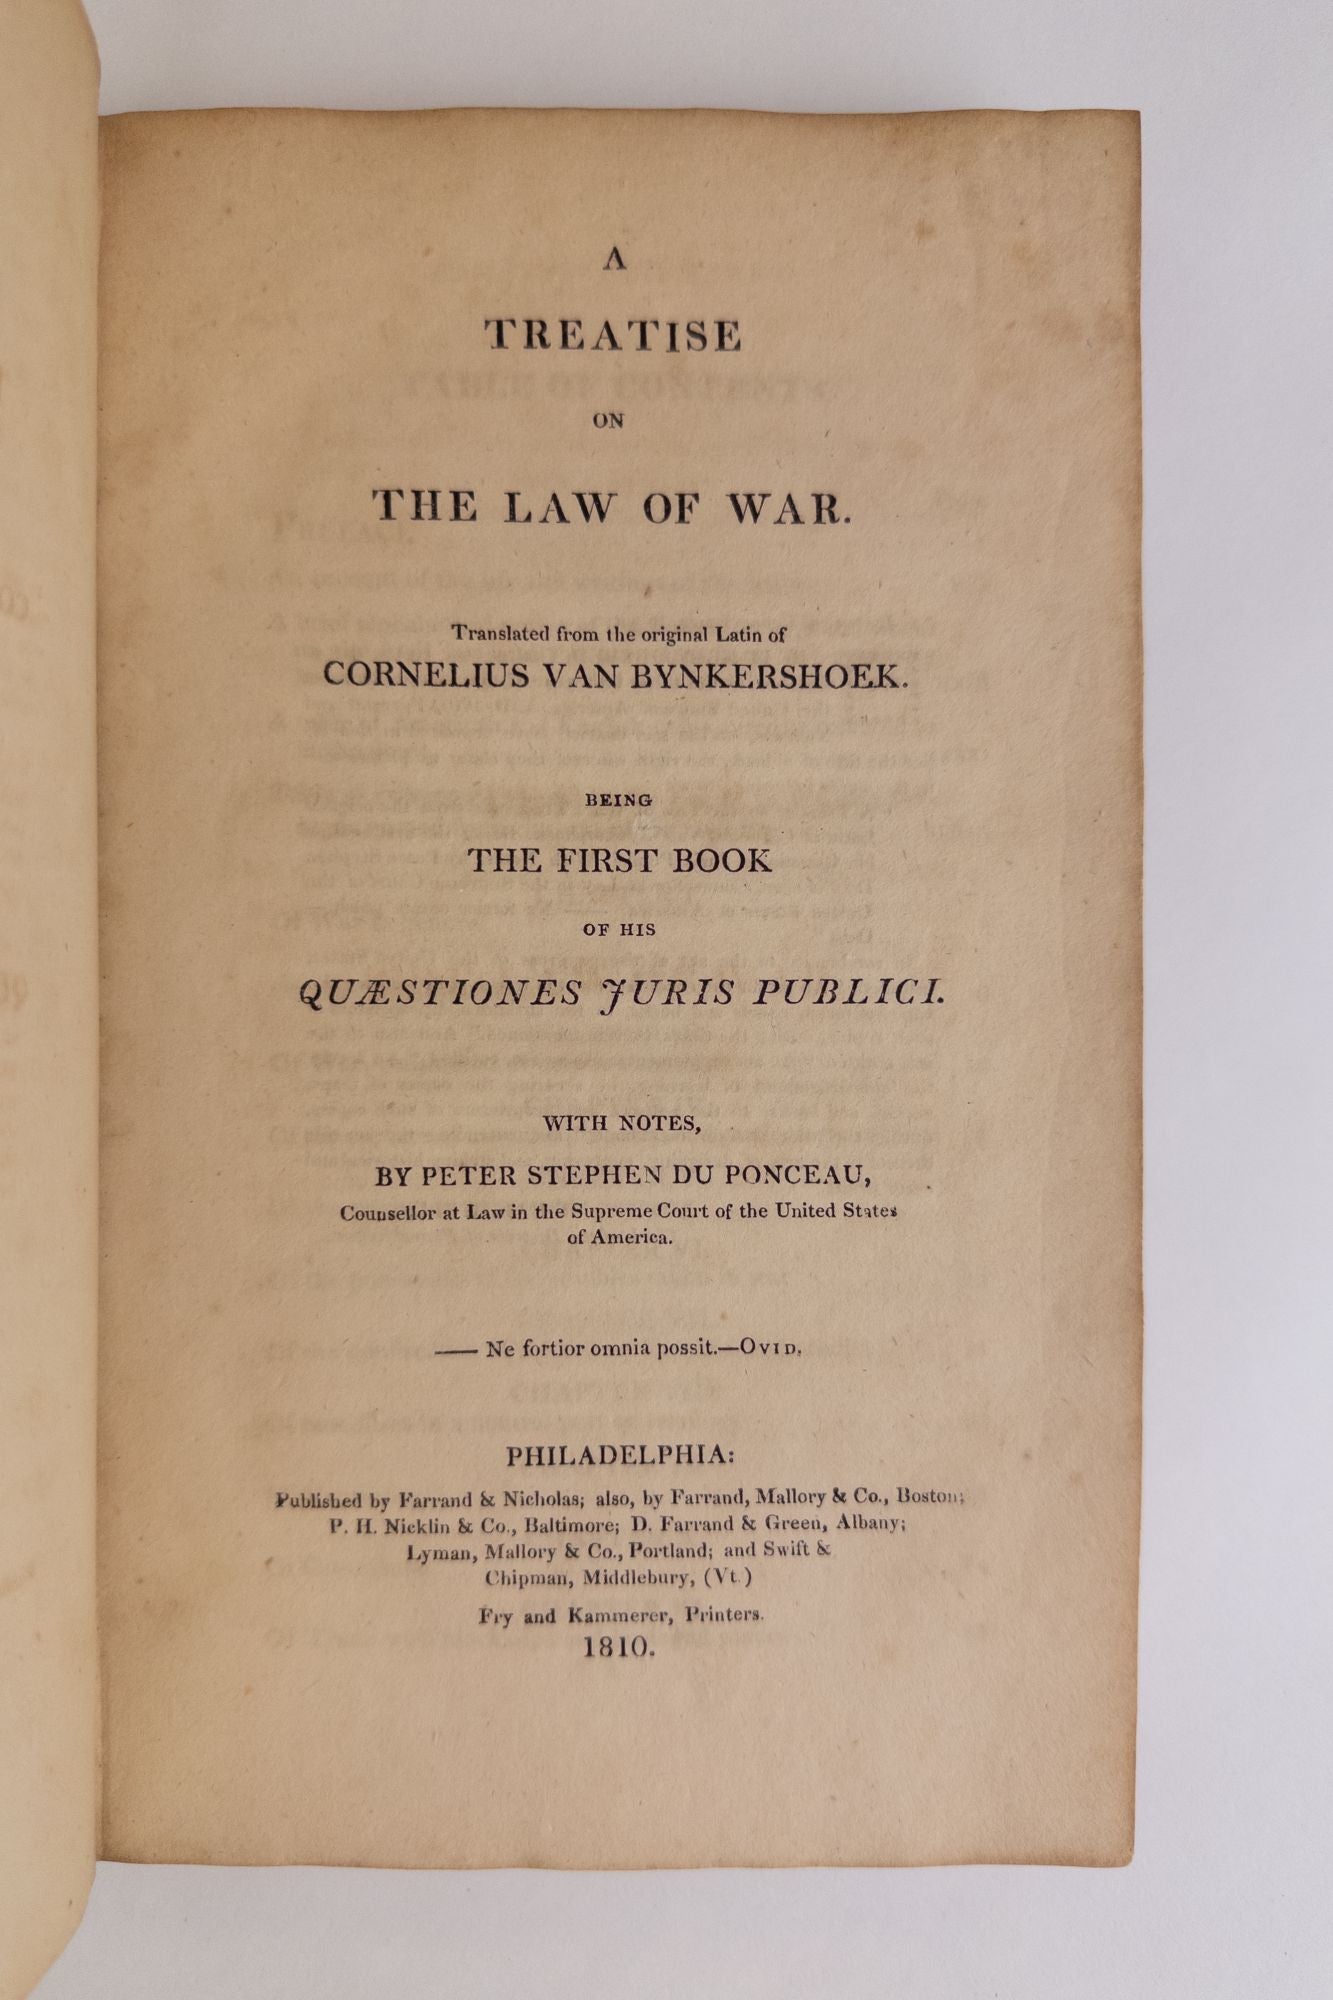 Product Image for A TREATISE ON THE LAW OF WAR, BEING THE FIRST BOOK OF HIS QUAESTIONES JURIS PUBLICI, WITH NOTES